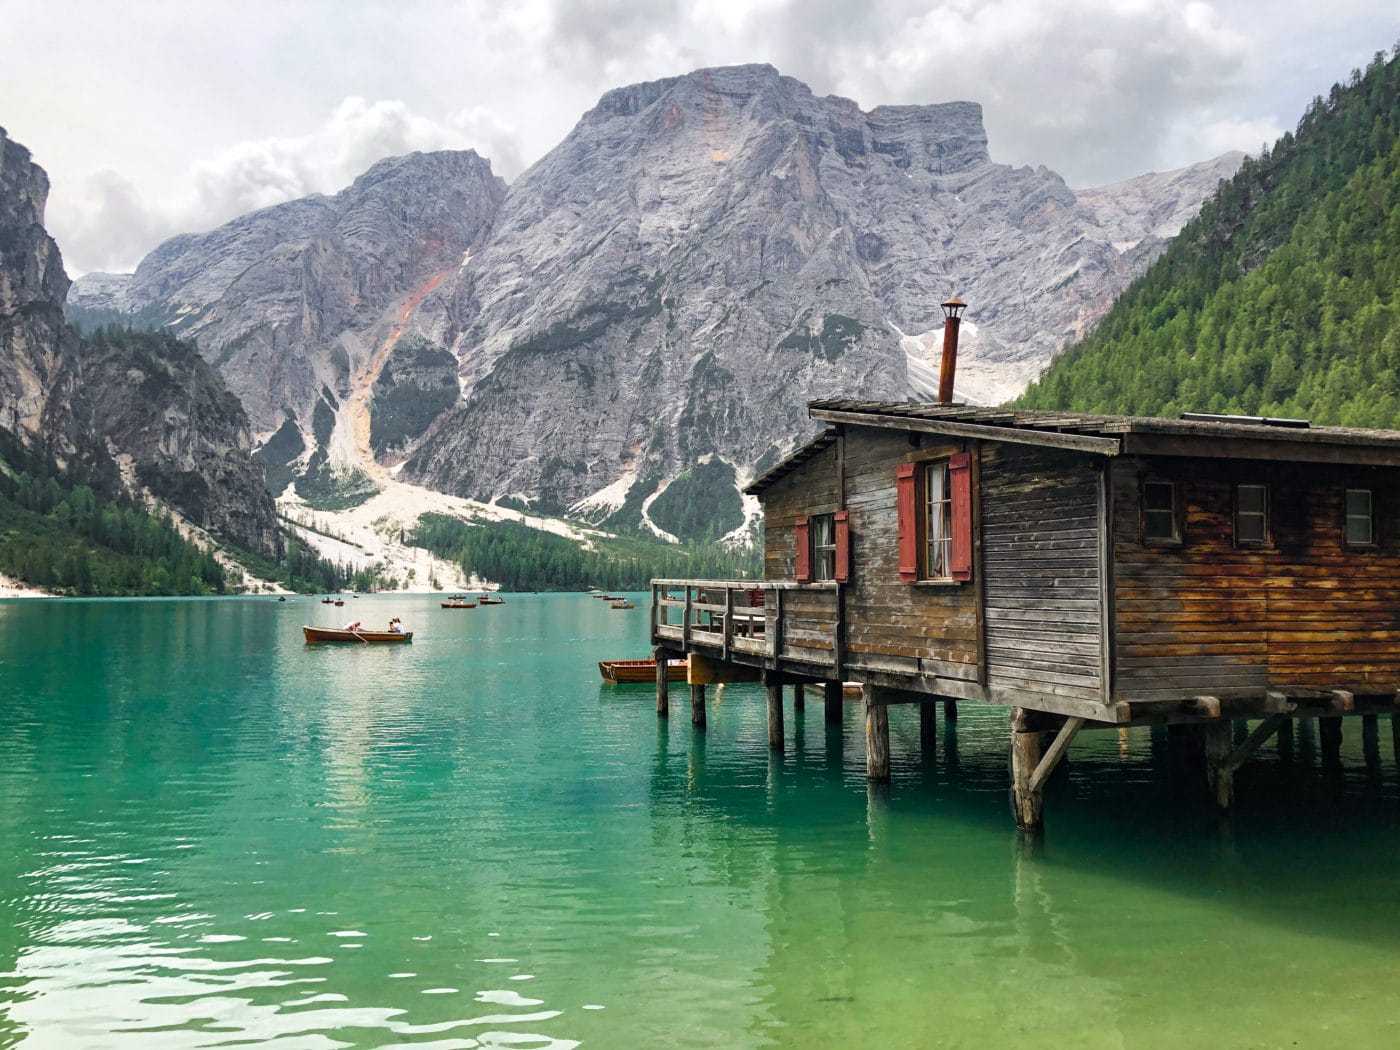 View of stunning emerald Lago di Braies (lake in the Dolomites) from the northside of the circuit trail